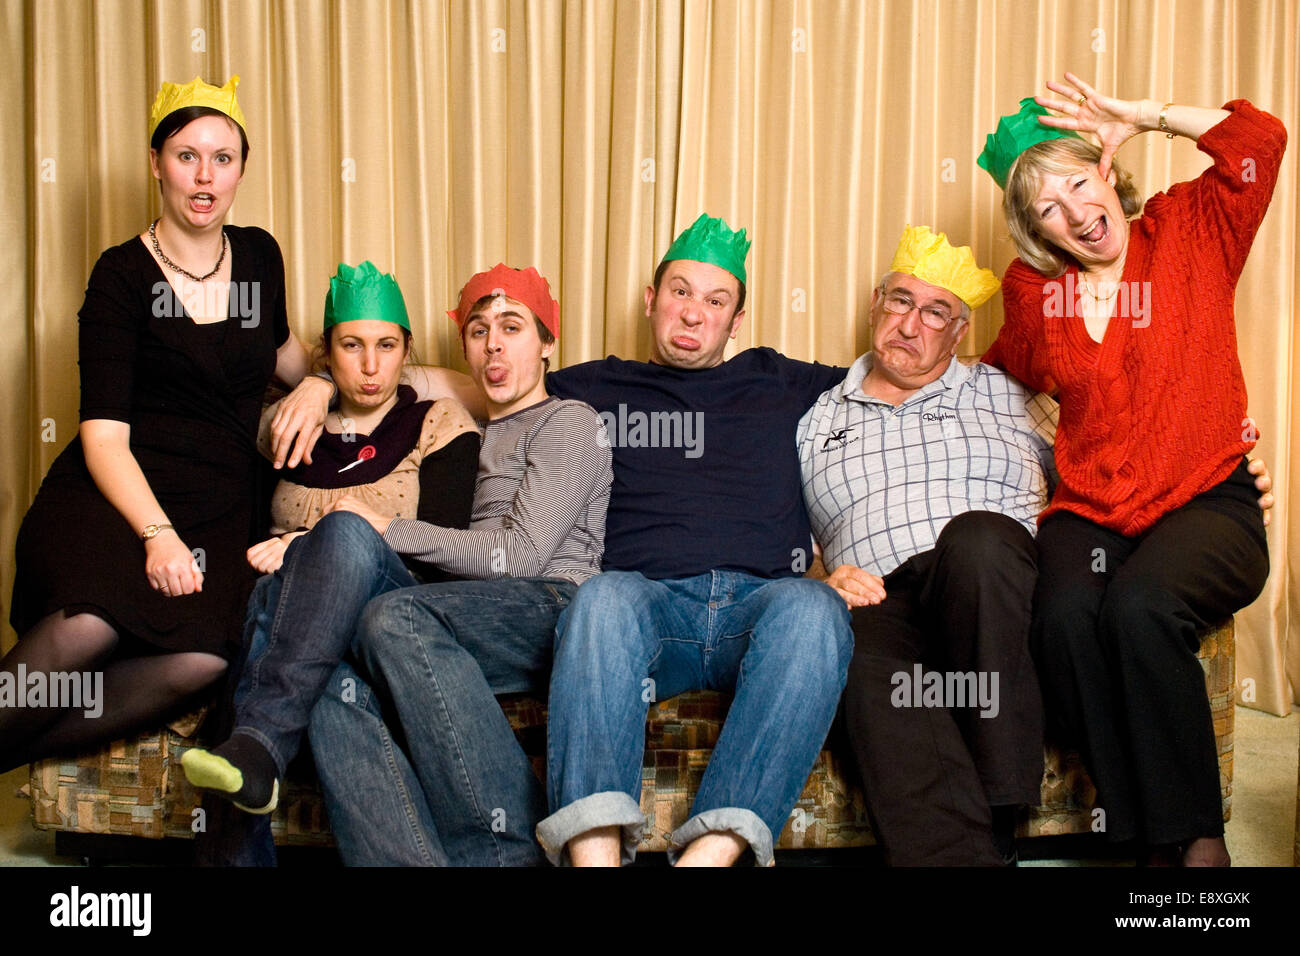 crazy funny family christmas party hat photo with everyone pulling silly faces Stock Photo